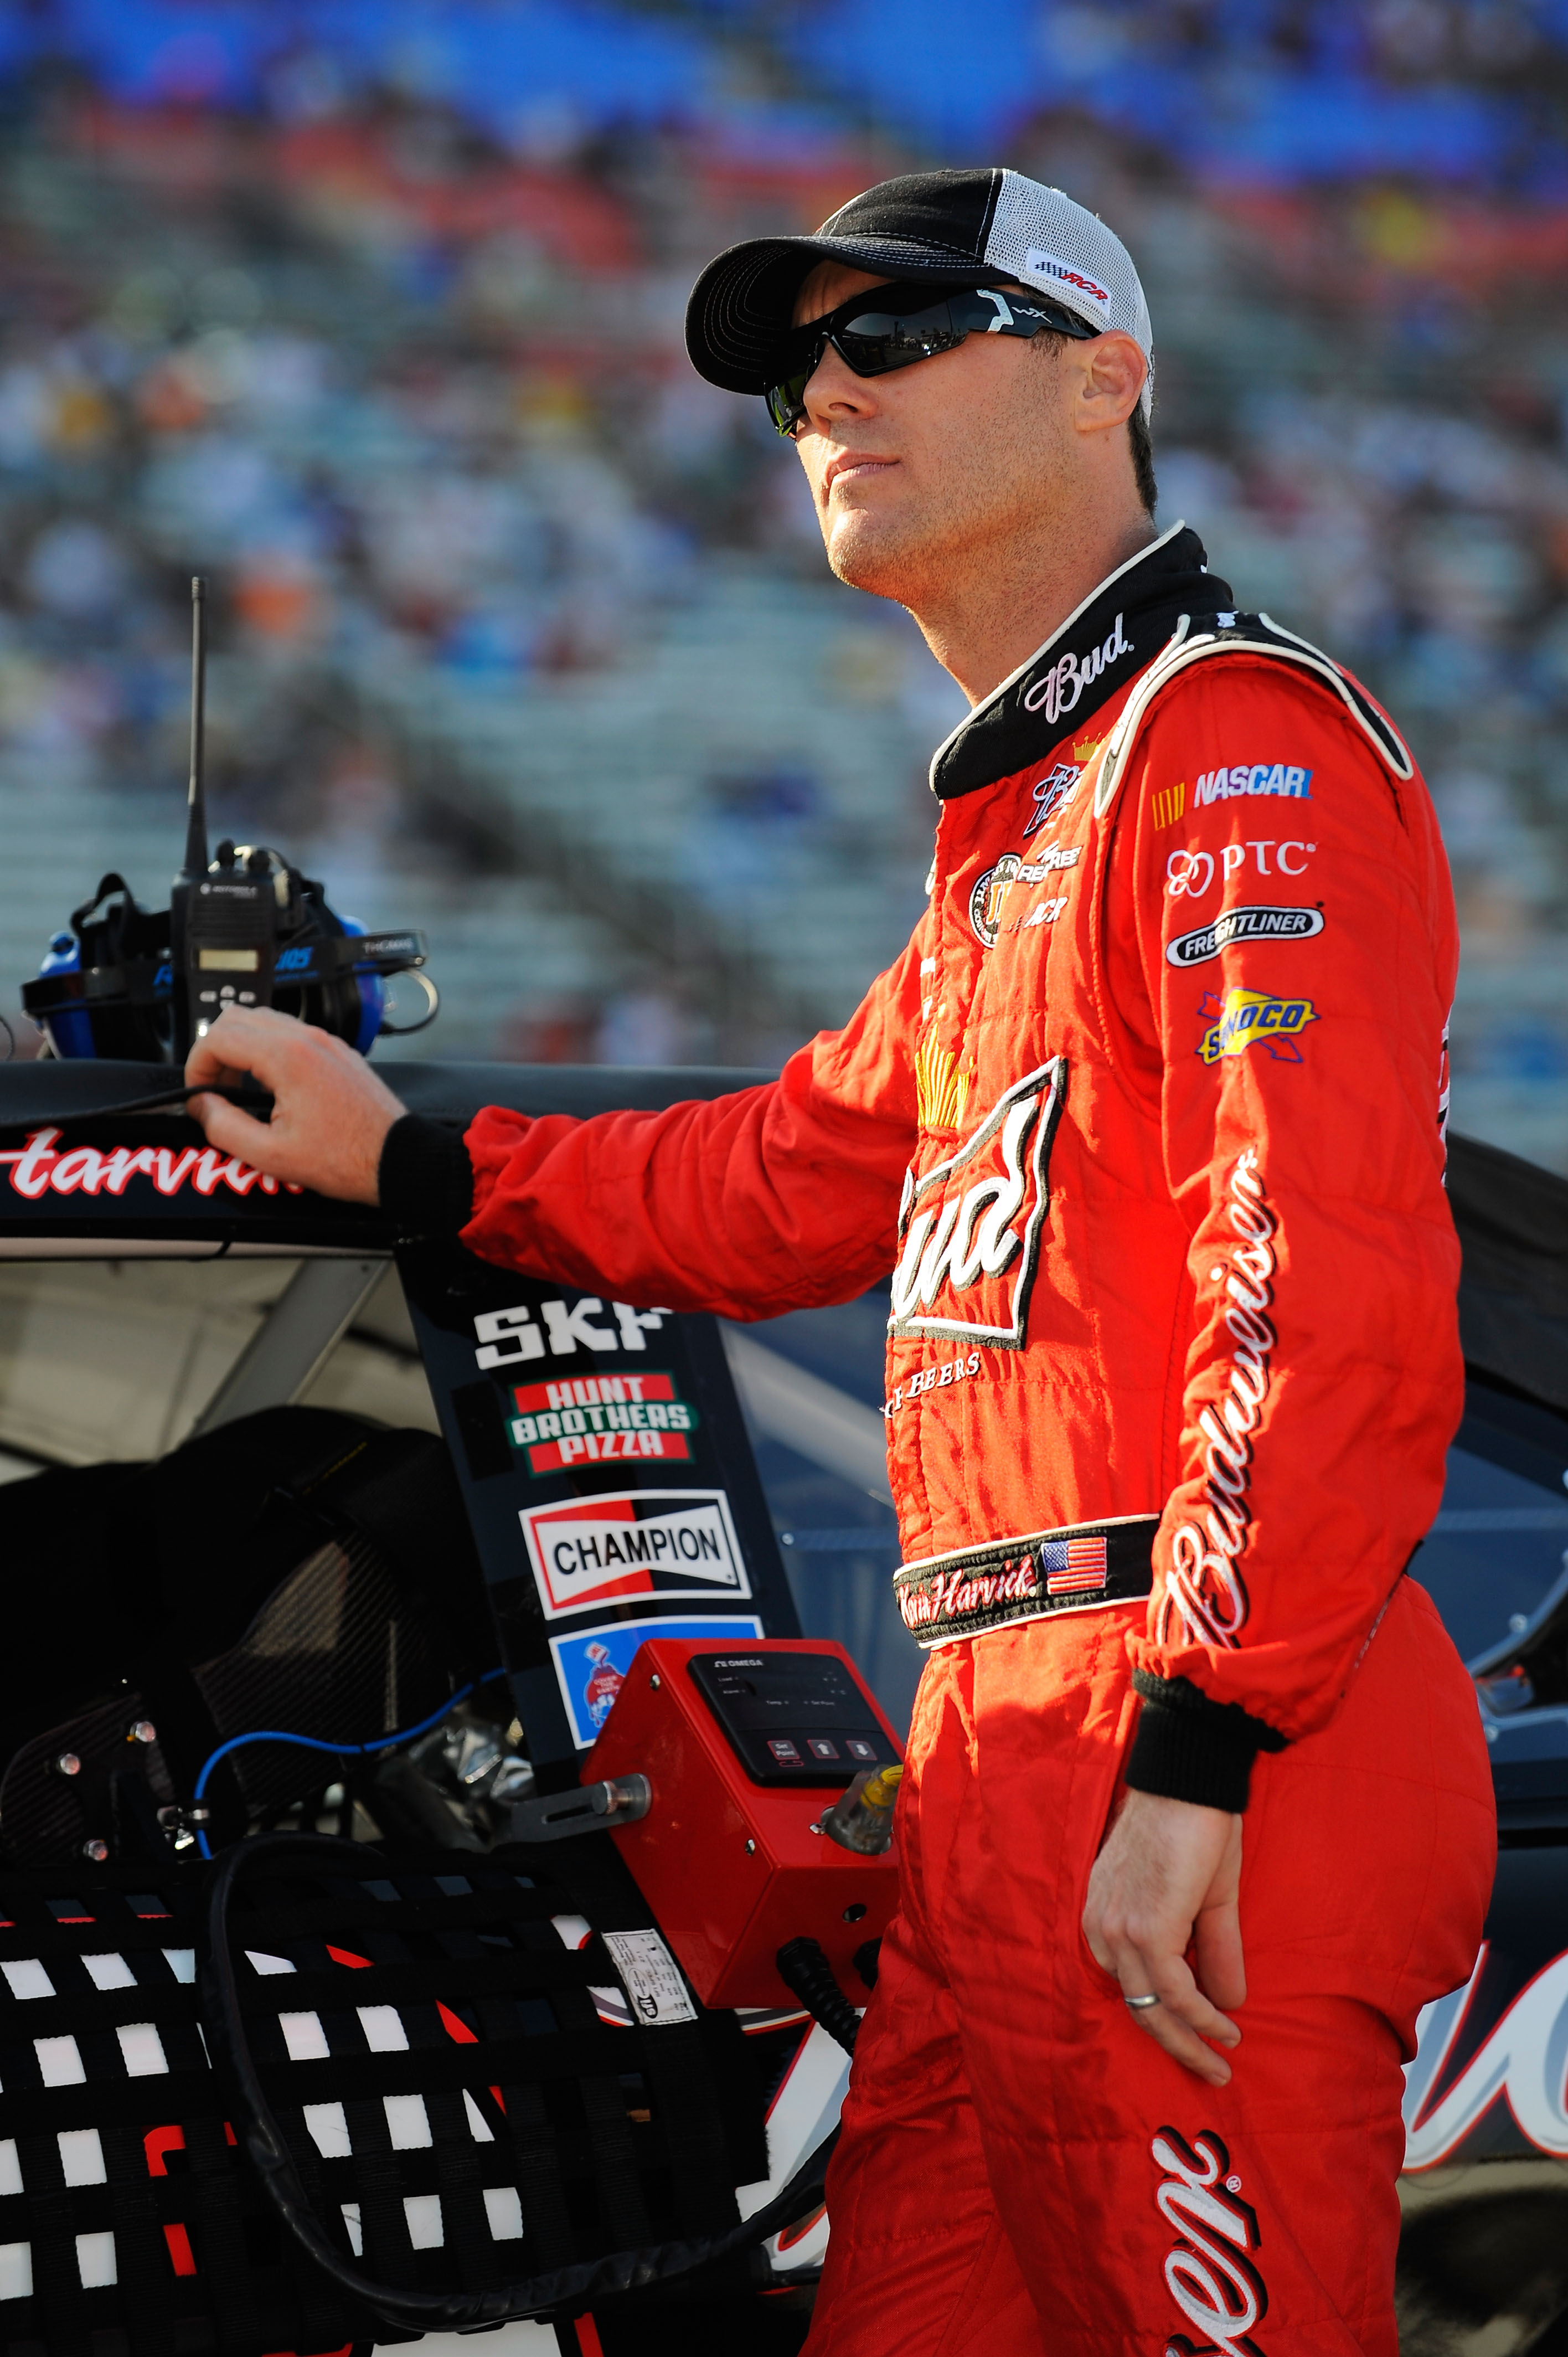 FORT WORTH, TX - APRIL 08:  Kevin Harvick, driver of the #29 Budweiser Chevrolet, stands on the grid during qualifying for the NASCAR Sprint Cup Series Samsung Mobile 500 at Texas Motor Speedway on April 8, 2011 in Fort Worth, Texas.  (Photo by Jared C. T